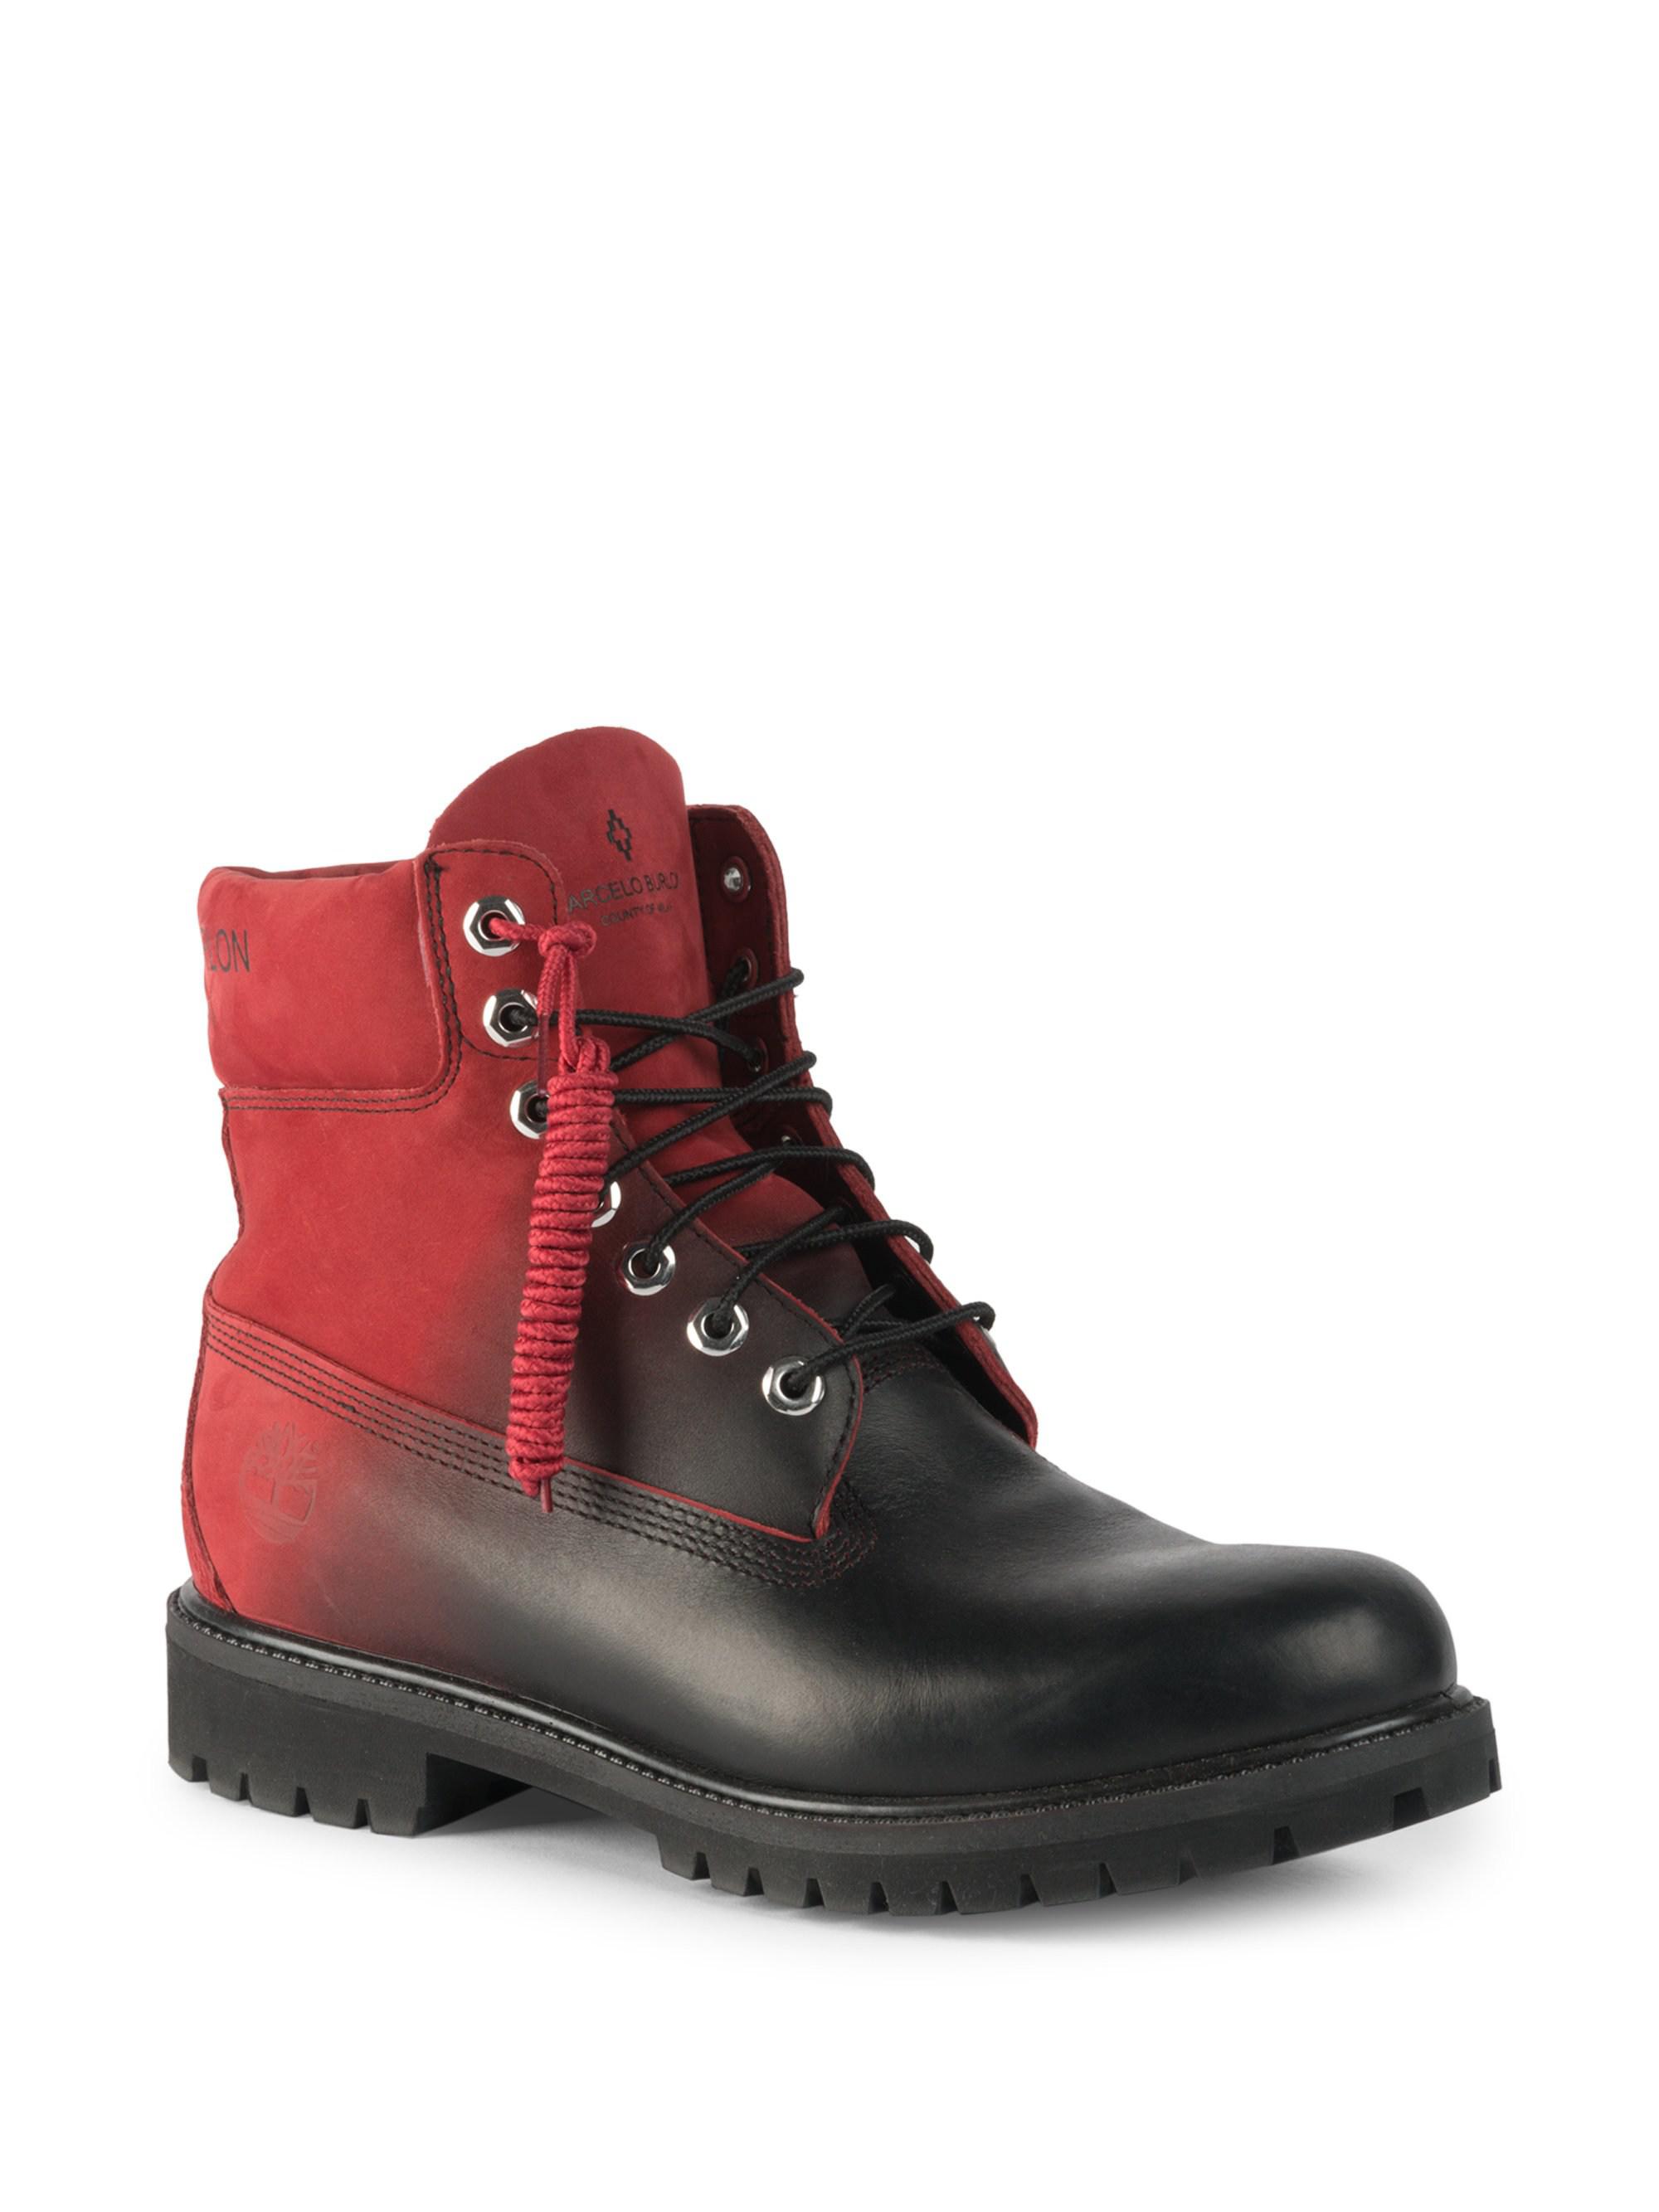 Marcelo Burlon Leather Timberland Boot in Black / Red (Red) for Men - Lyst